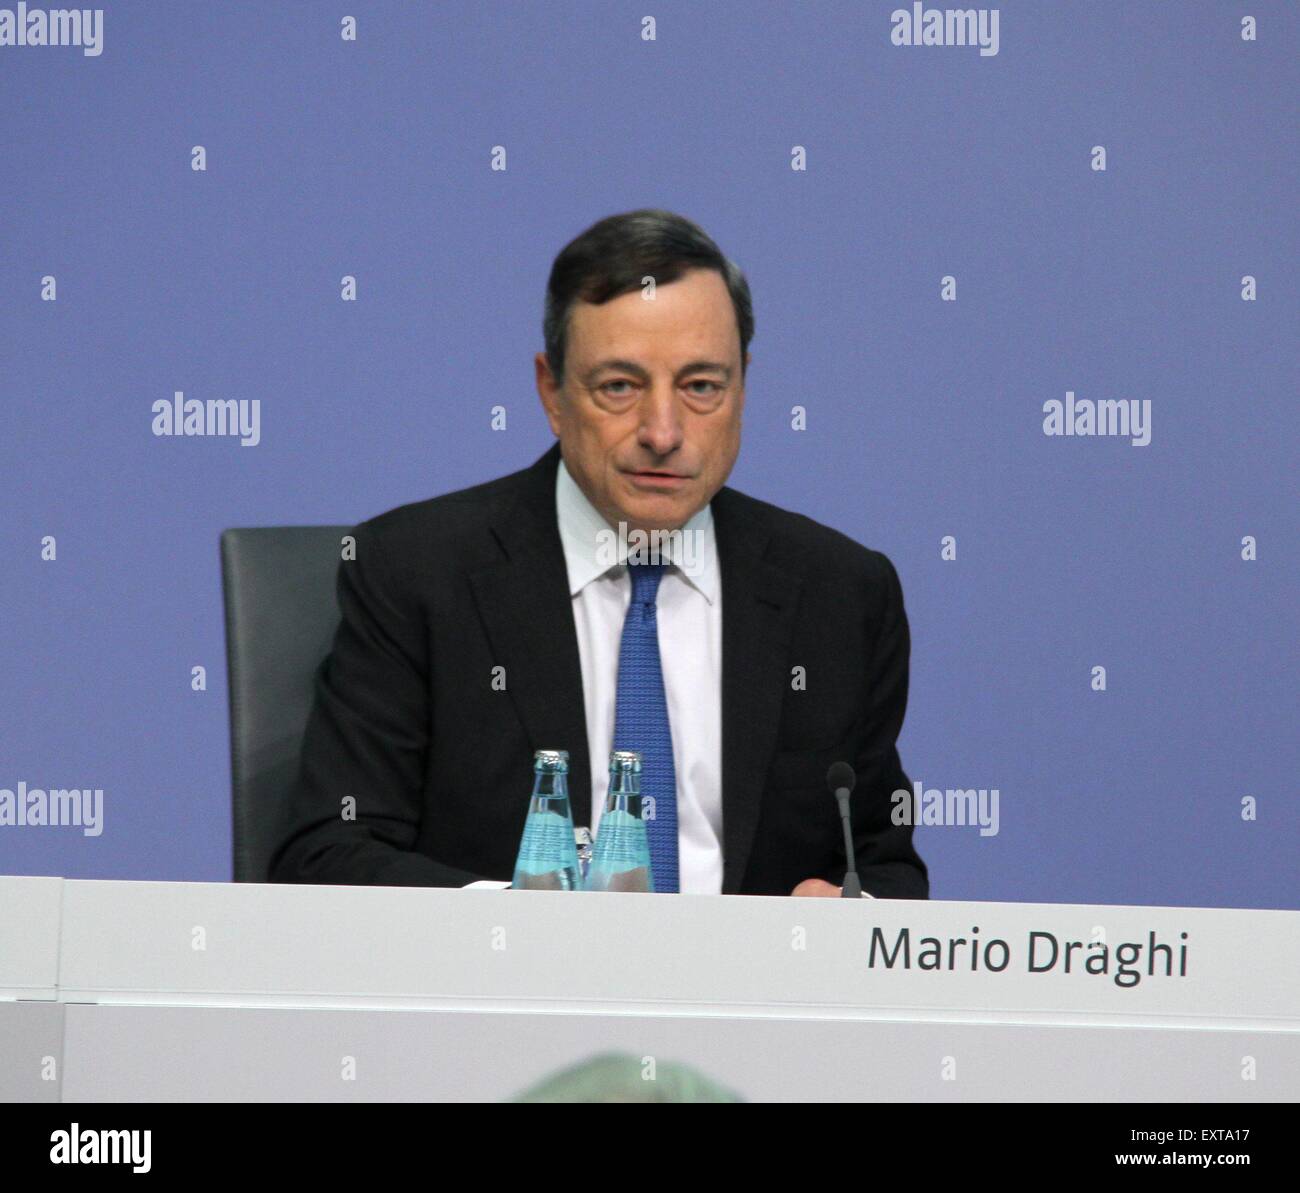 Frankfurt, Germany. 16th July, 2015. The European Central Bank President Mario Draghi attends a press conference in Frankfurt, Germany, July 16, 2015. ECB governing council on Thursday decided to raise the Emergency Liquidity Assistance to Greek banks by 900 million euros (about 981 million U.S. dollars). Credit:  Rao Bo/Xinhua/Alamy Live News Stock Photo